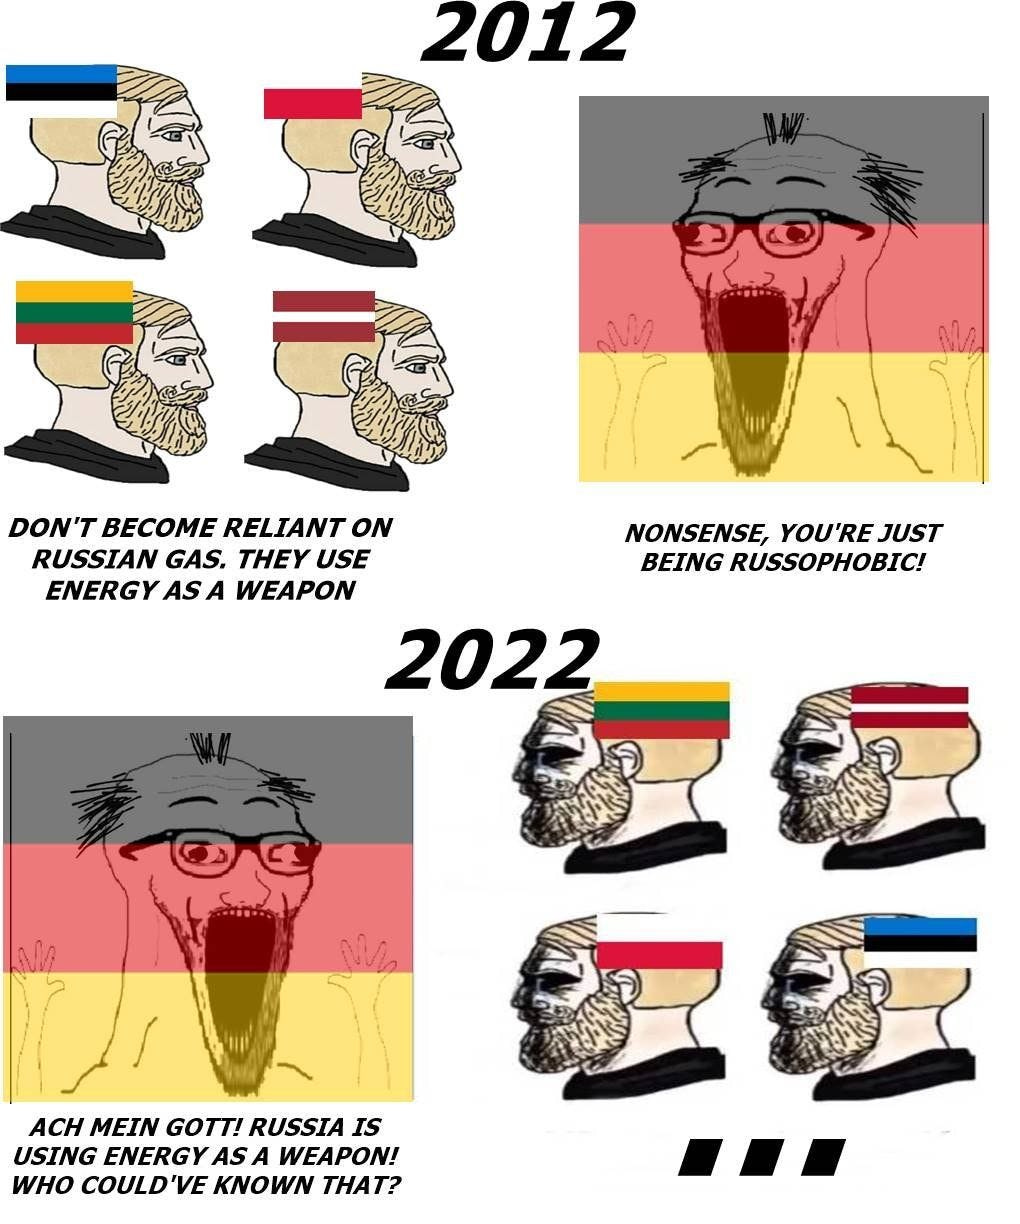 An accurate recap of Germany’s 